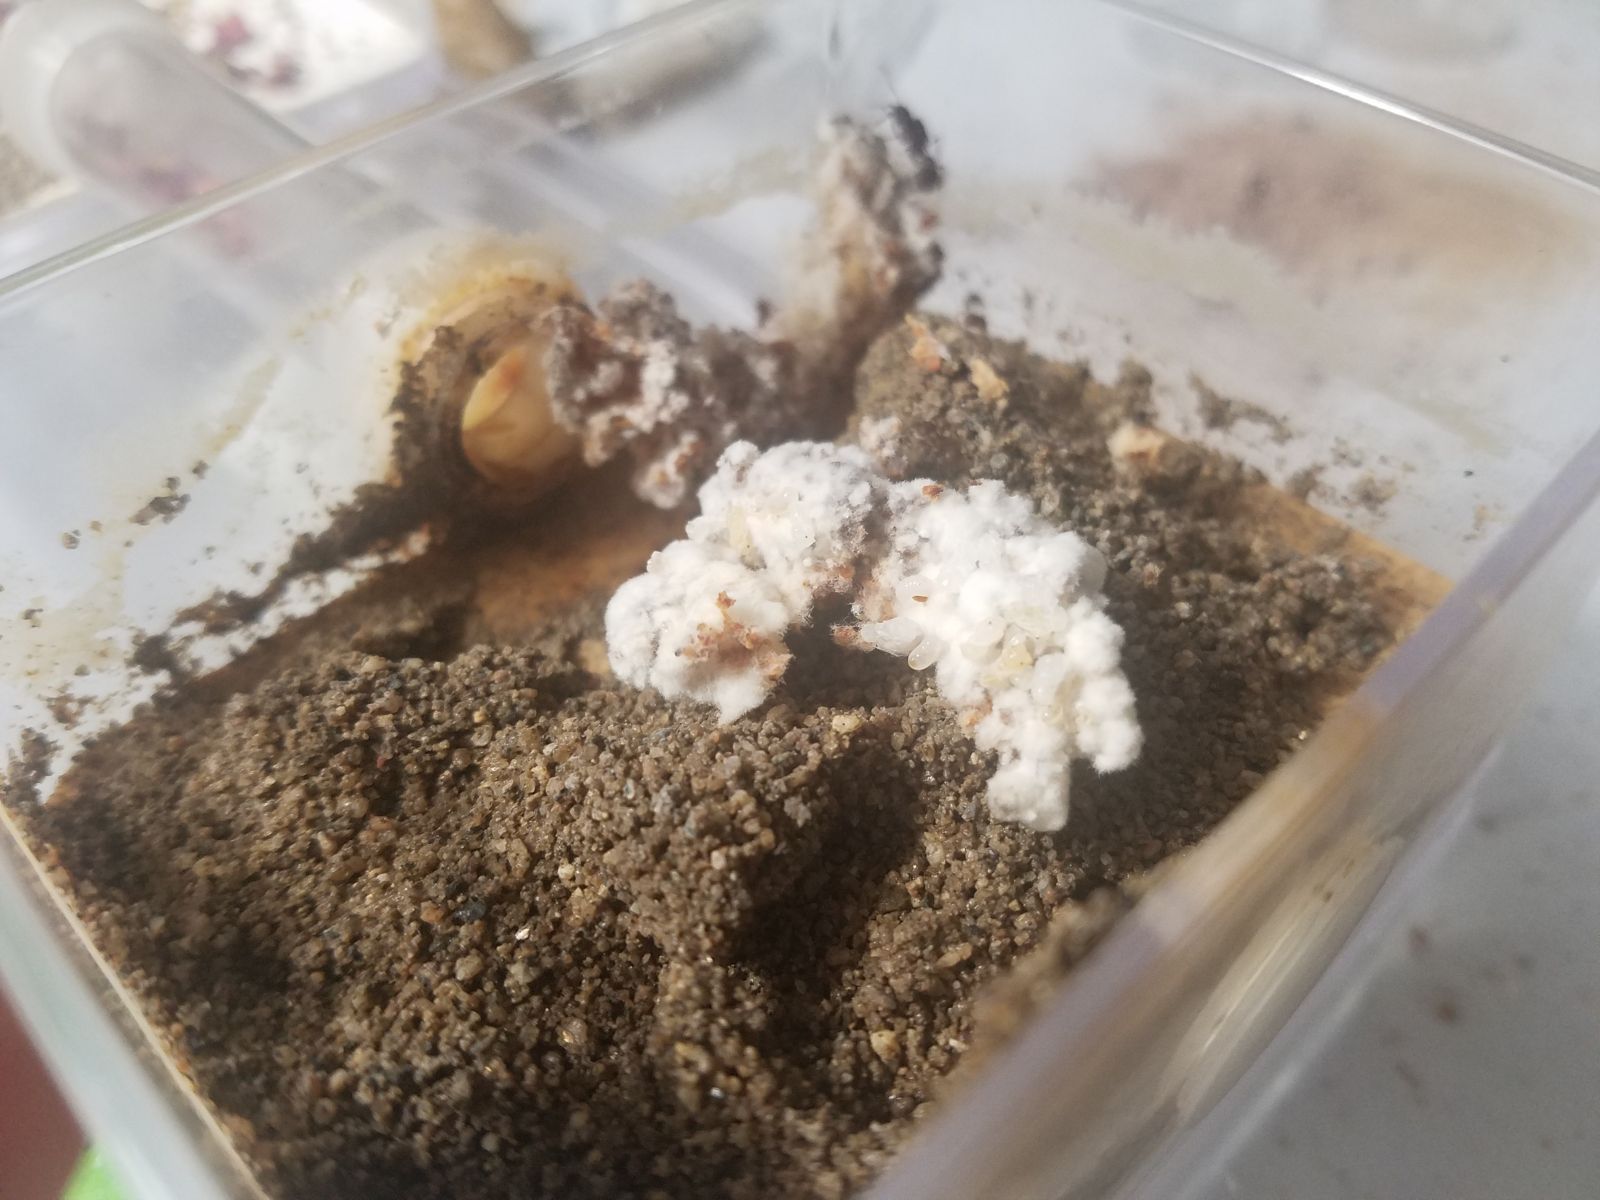 Colony 1 with new fungus